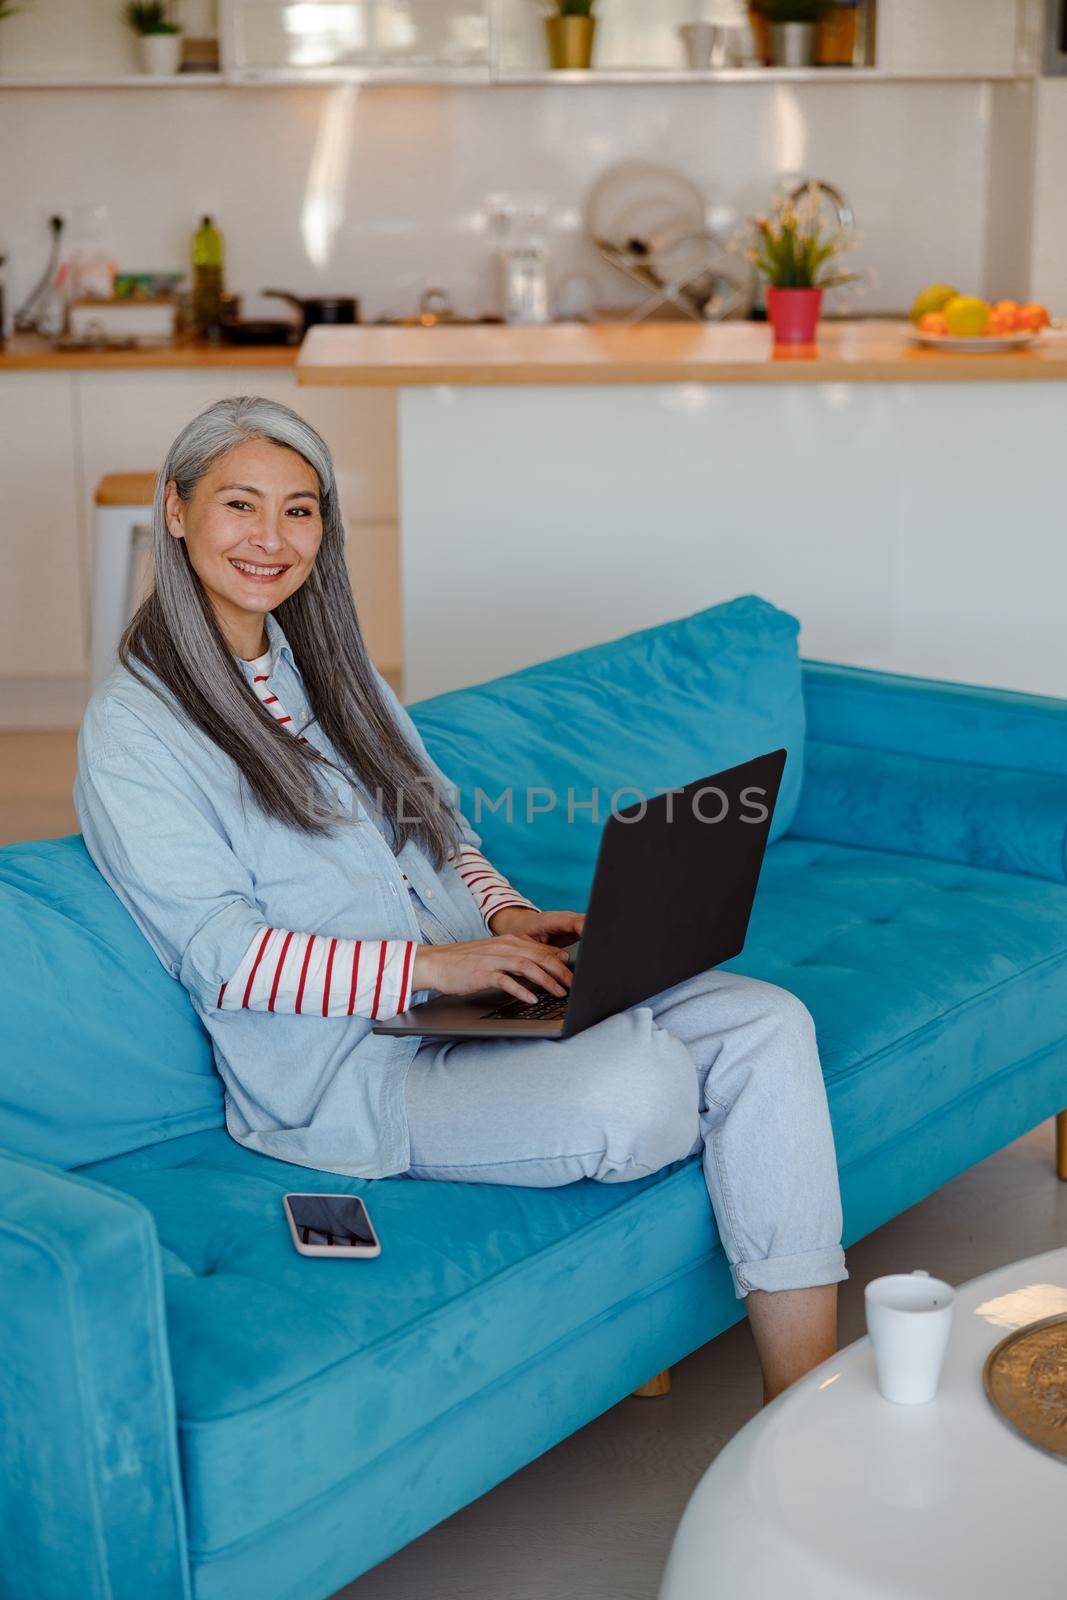 Joyful lady looking at camera and smiling while sitting on sofa and working on modern notebook